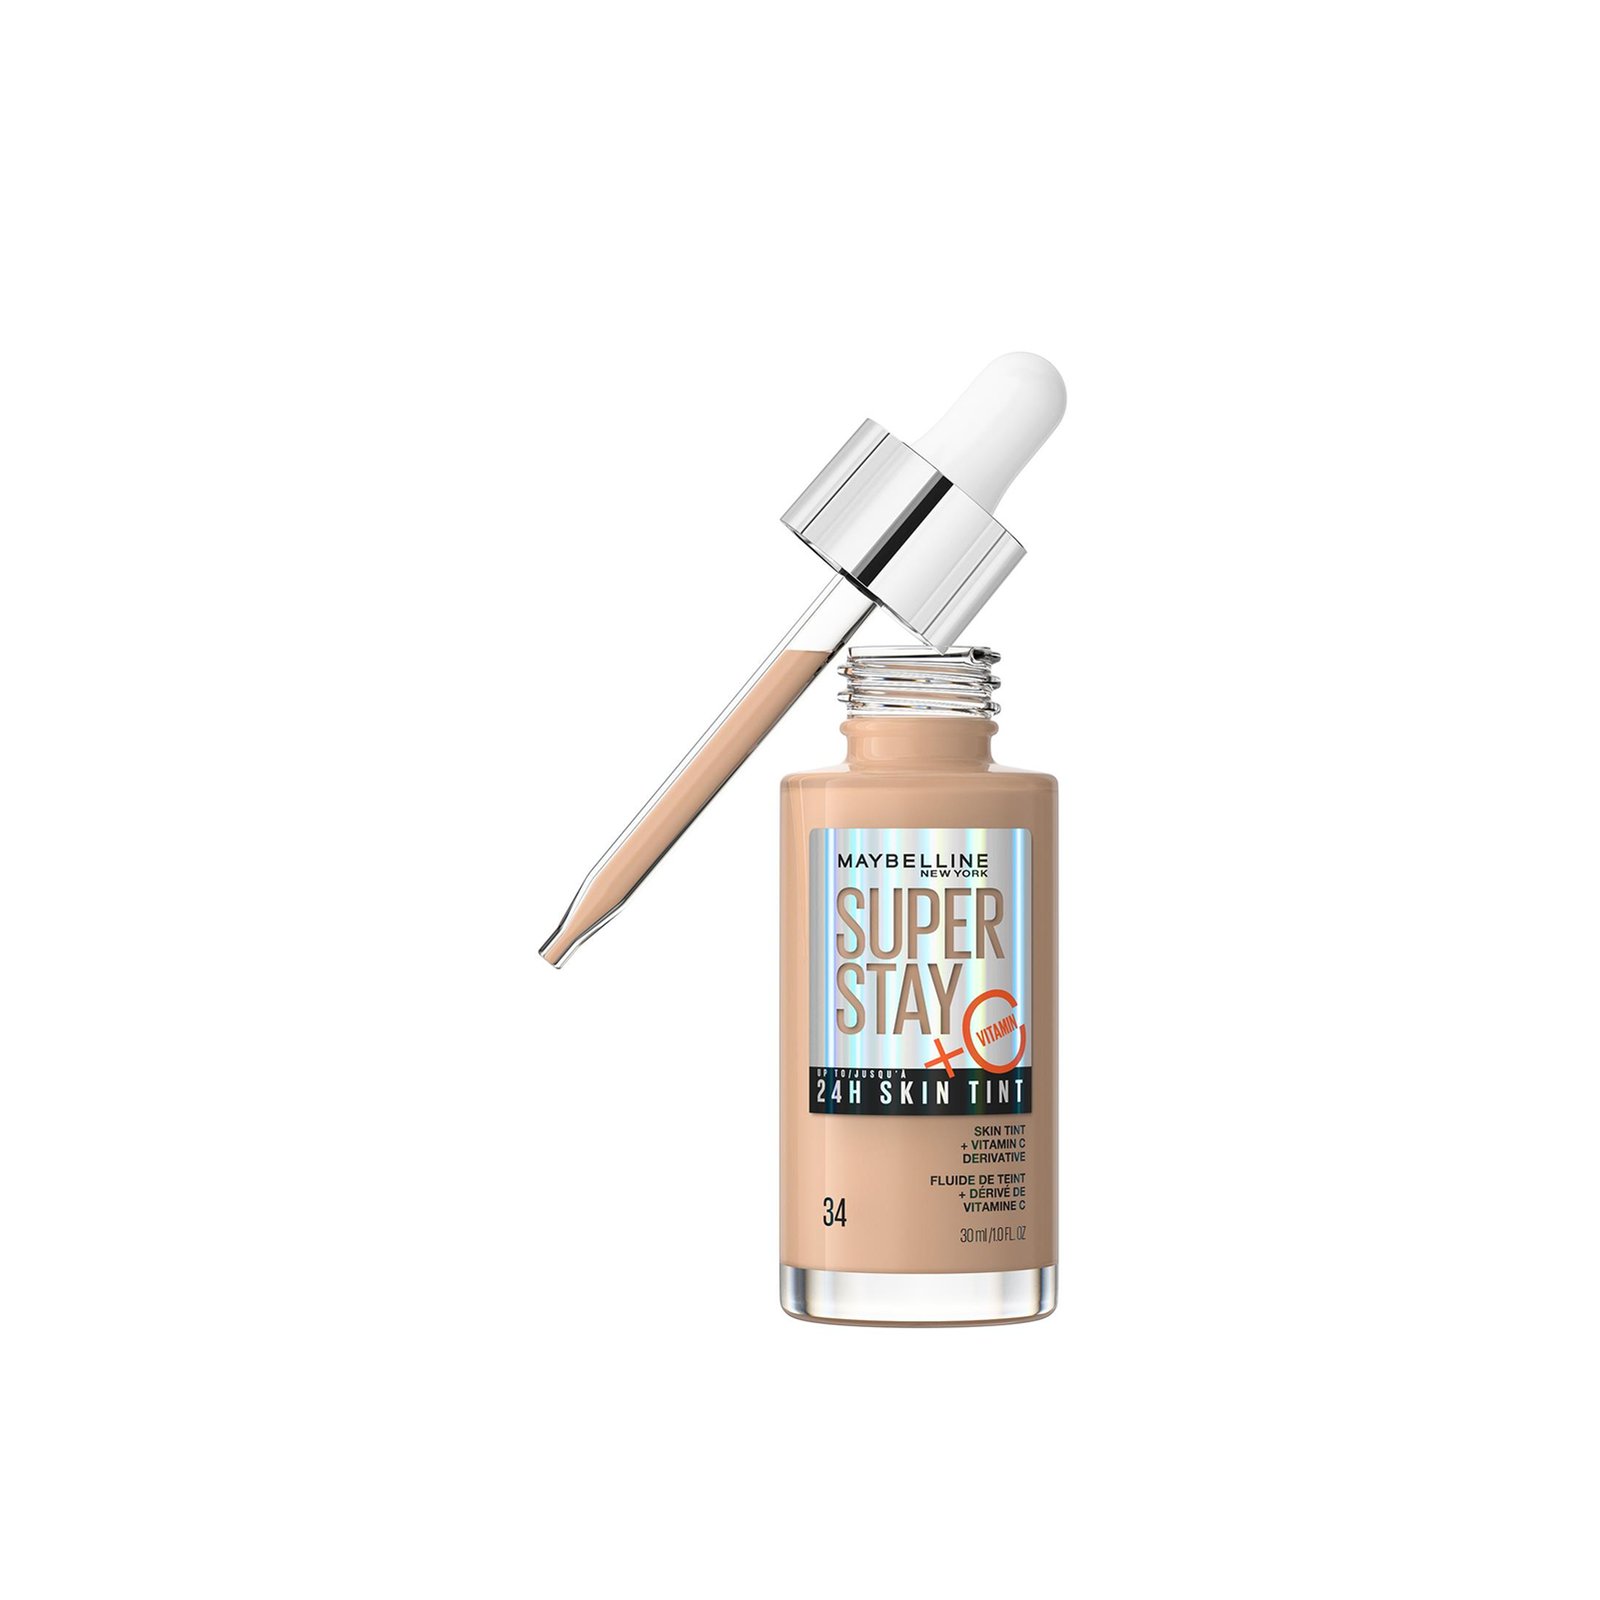 https://static.beautytocare.com/cdn-cgi/image/width=1600,height=1600,f=auto/media/catalog/product//m/a/maybelline-super-stay-24h-skin-tint-foundation-34-30ml.png